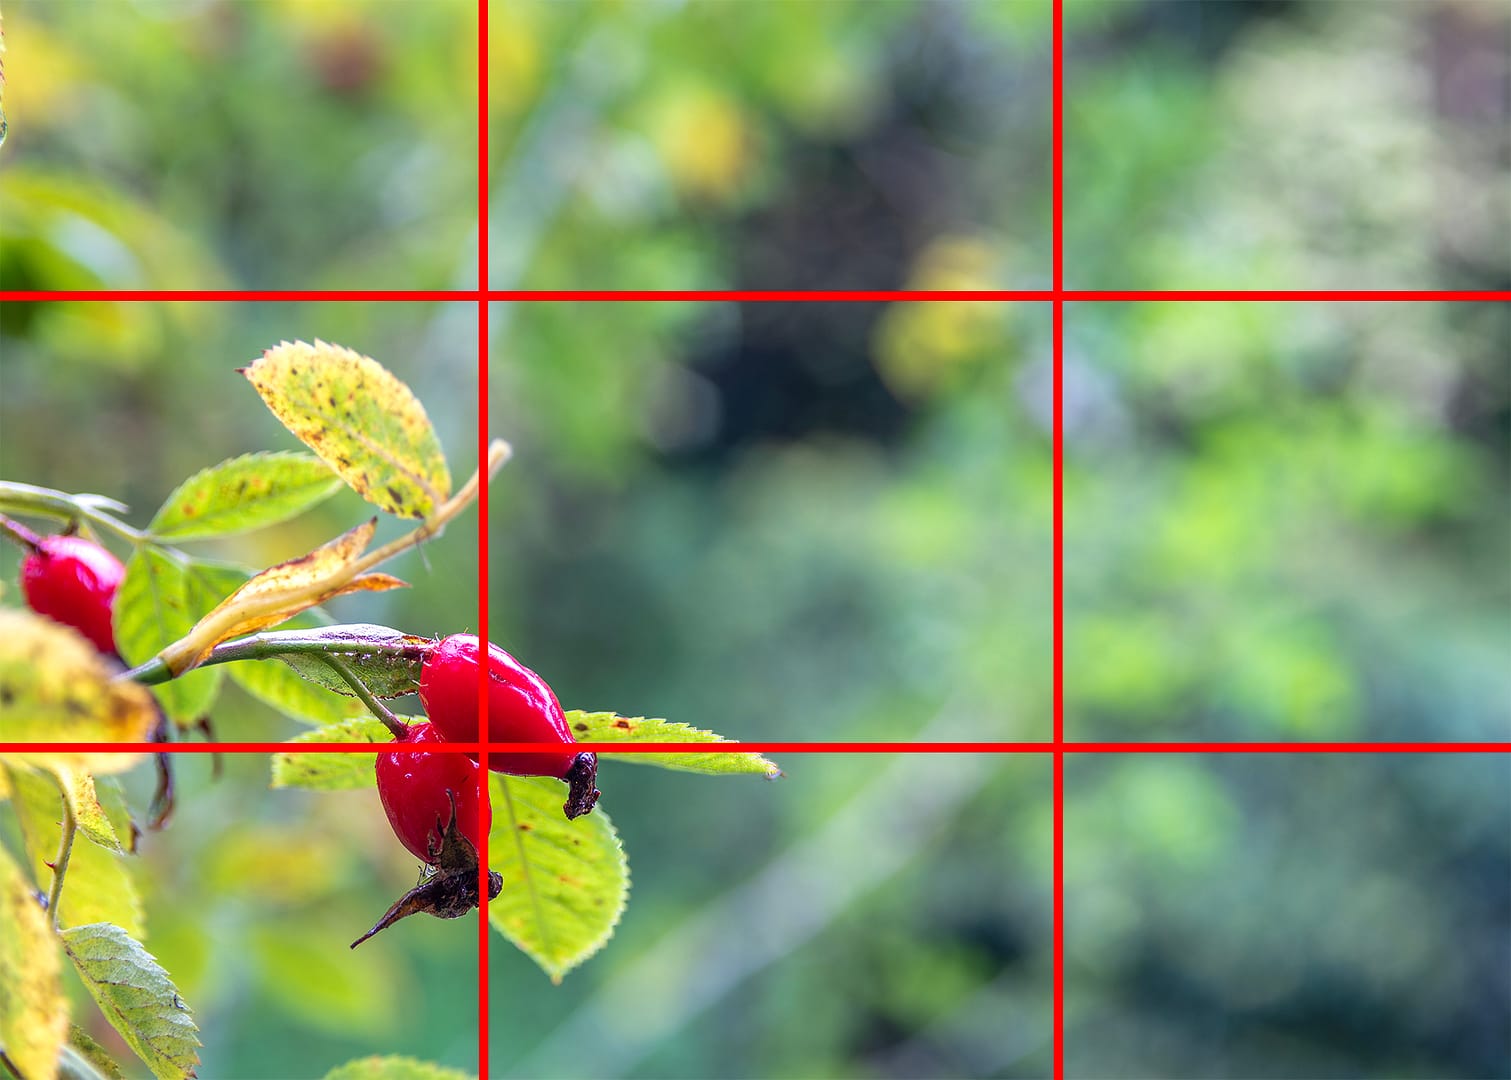 Using the Rule of Thirds in Photography